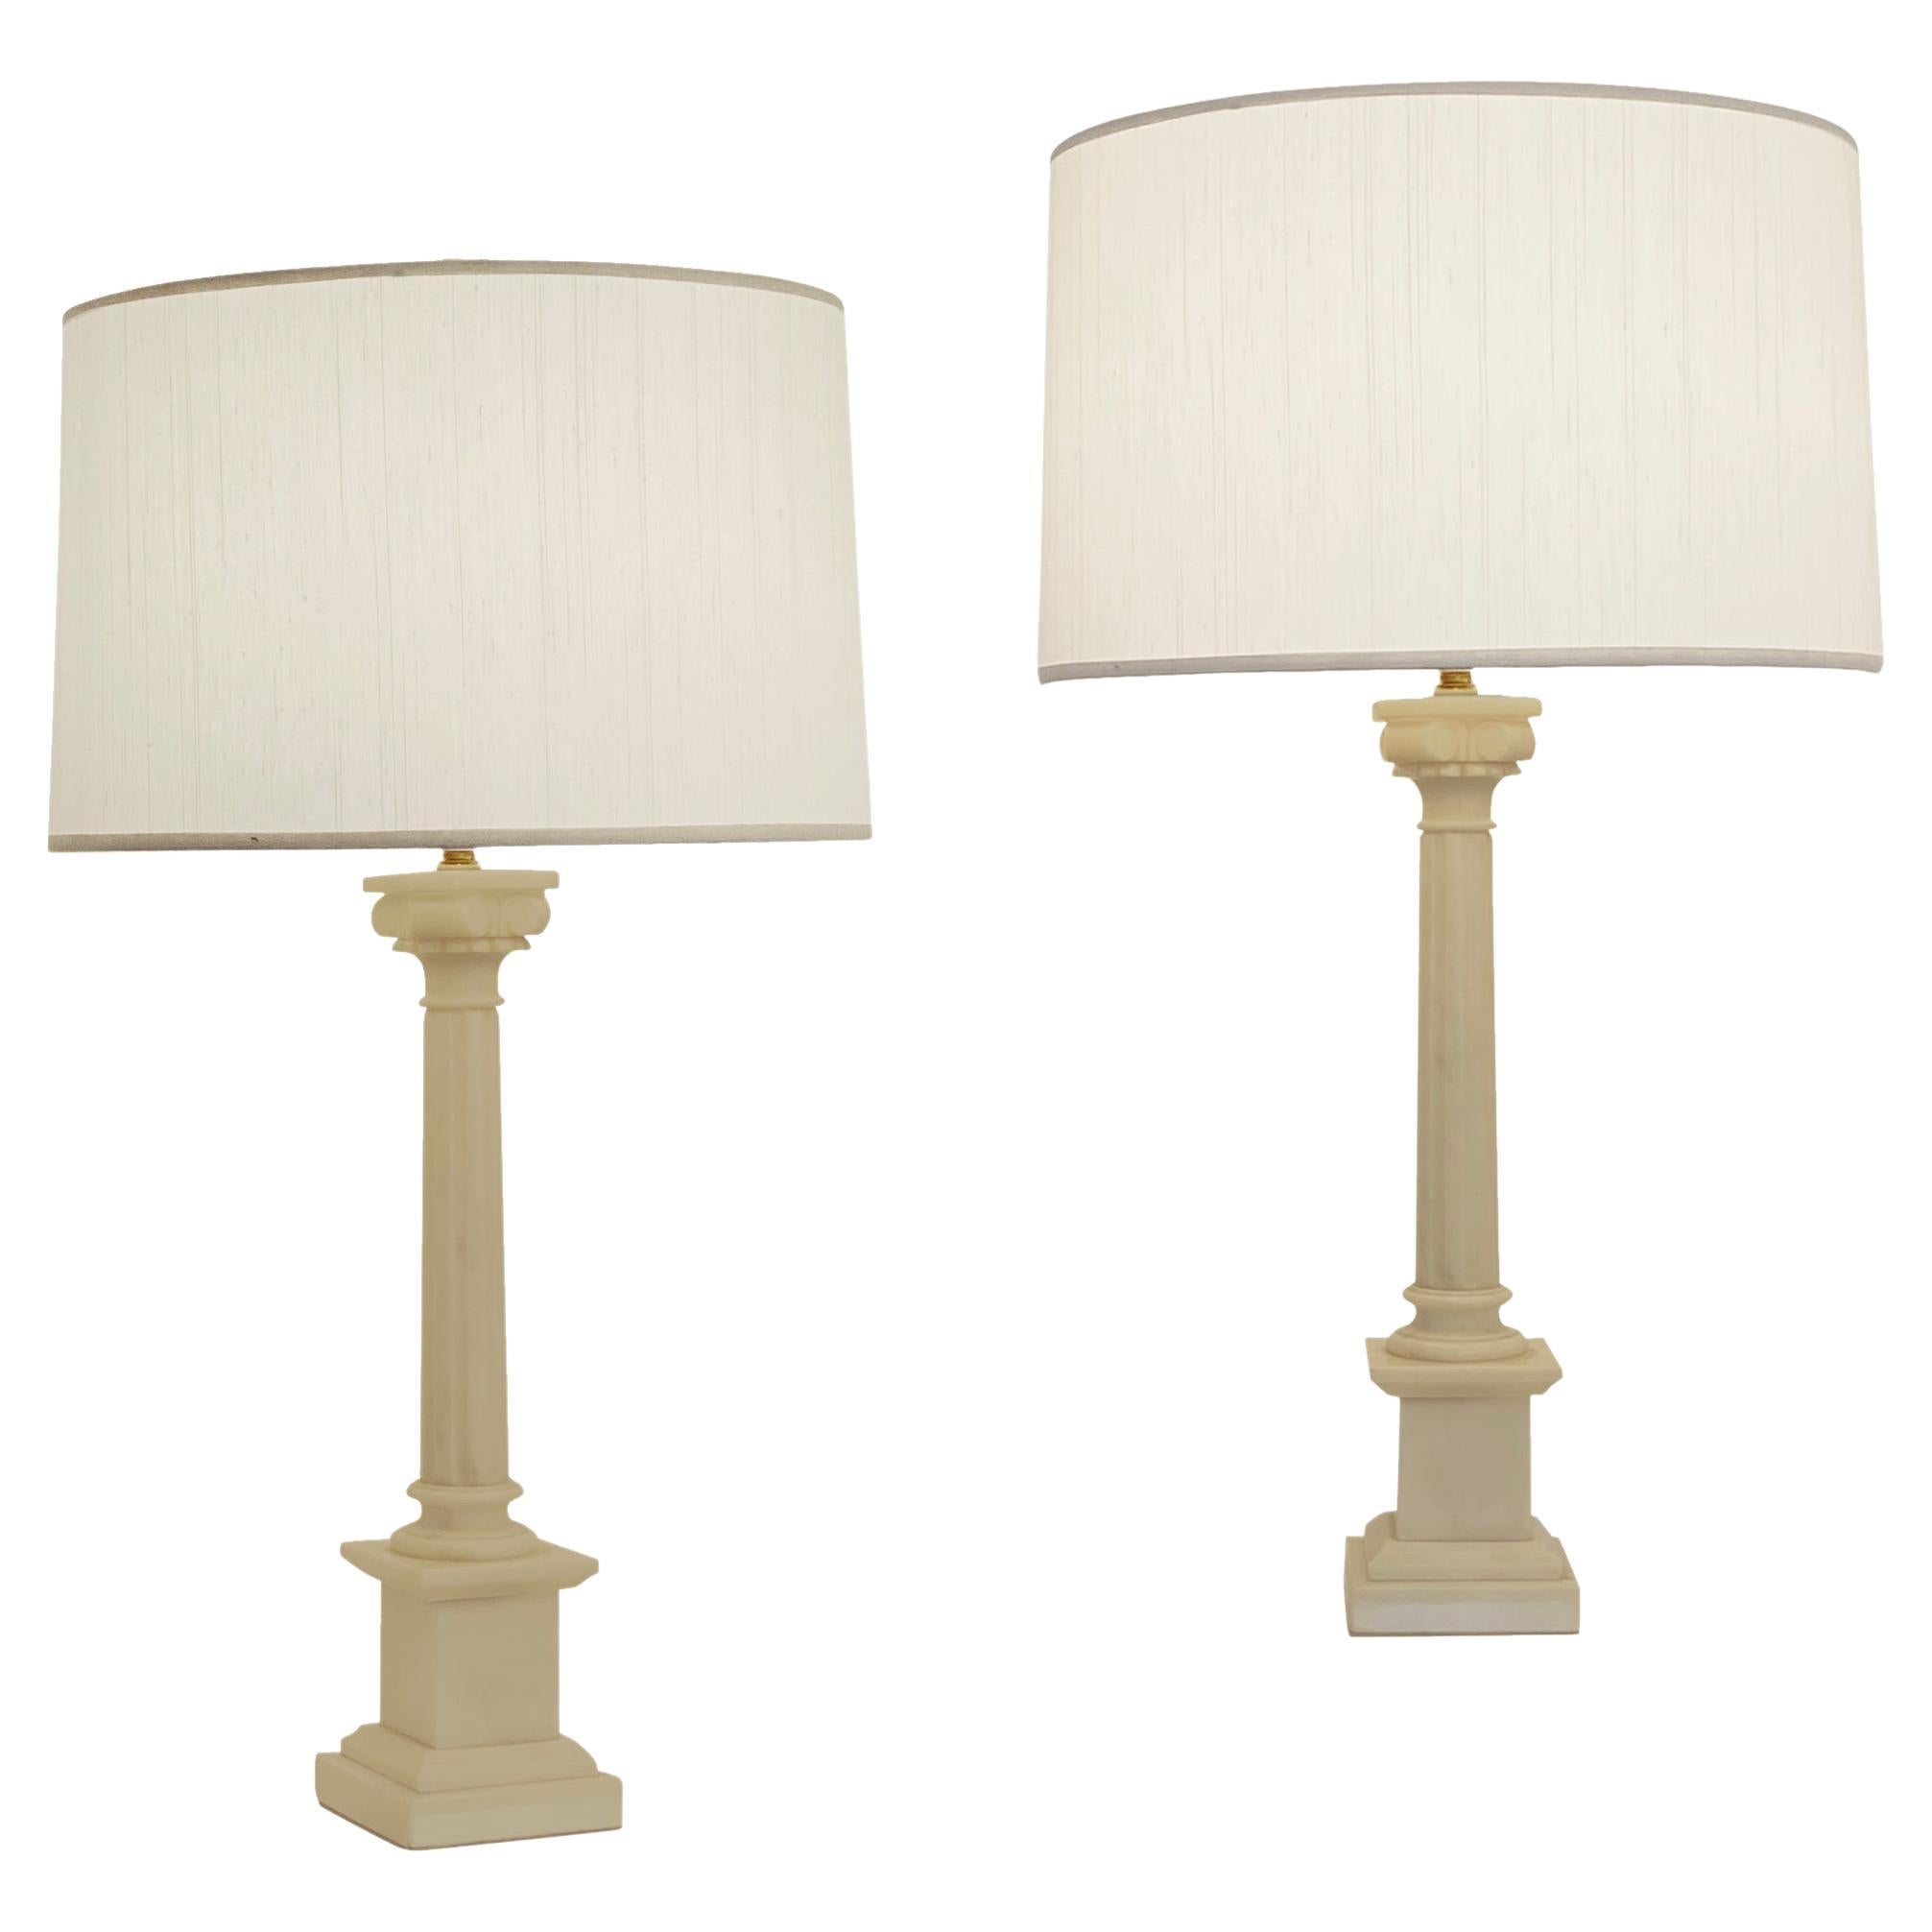 Neoclassical Corinthian Ionic Alabaster Carved Table Lamps, a Pair